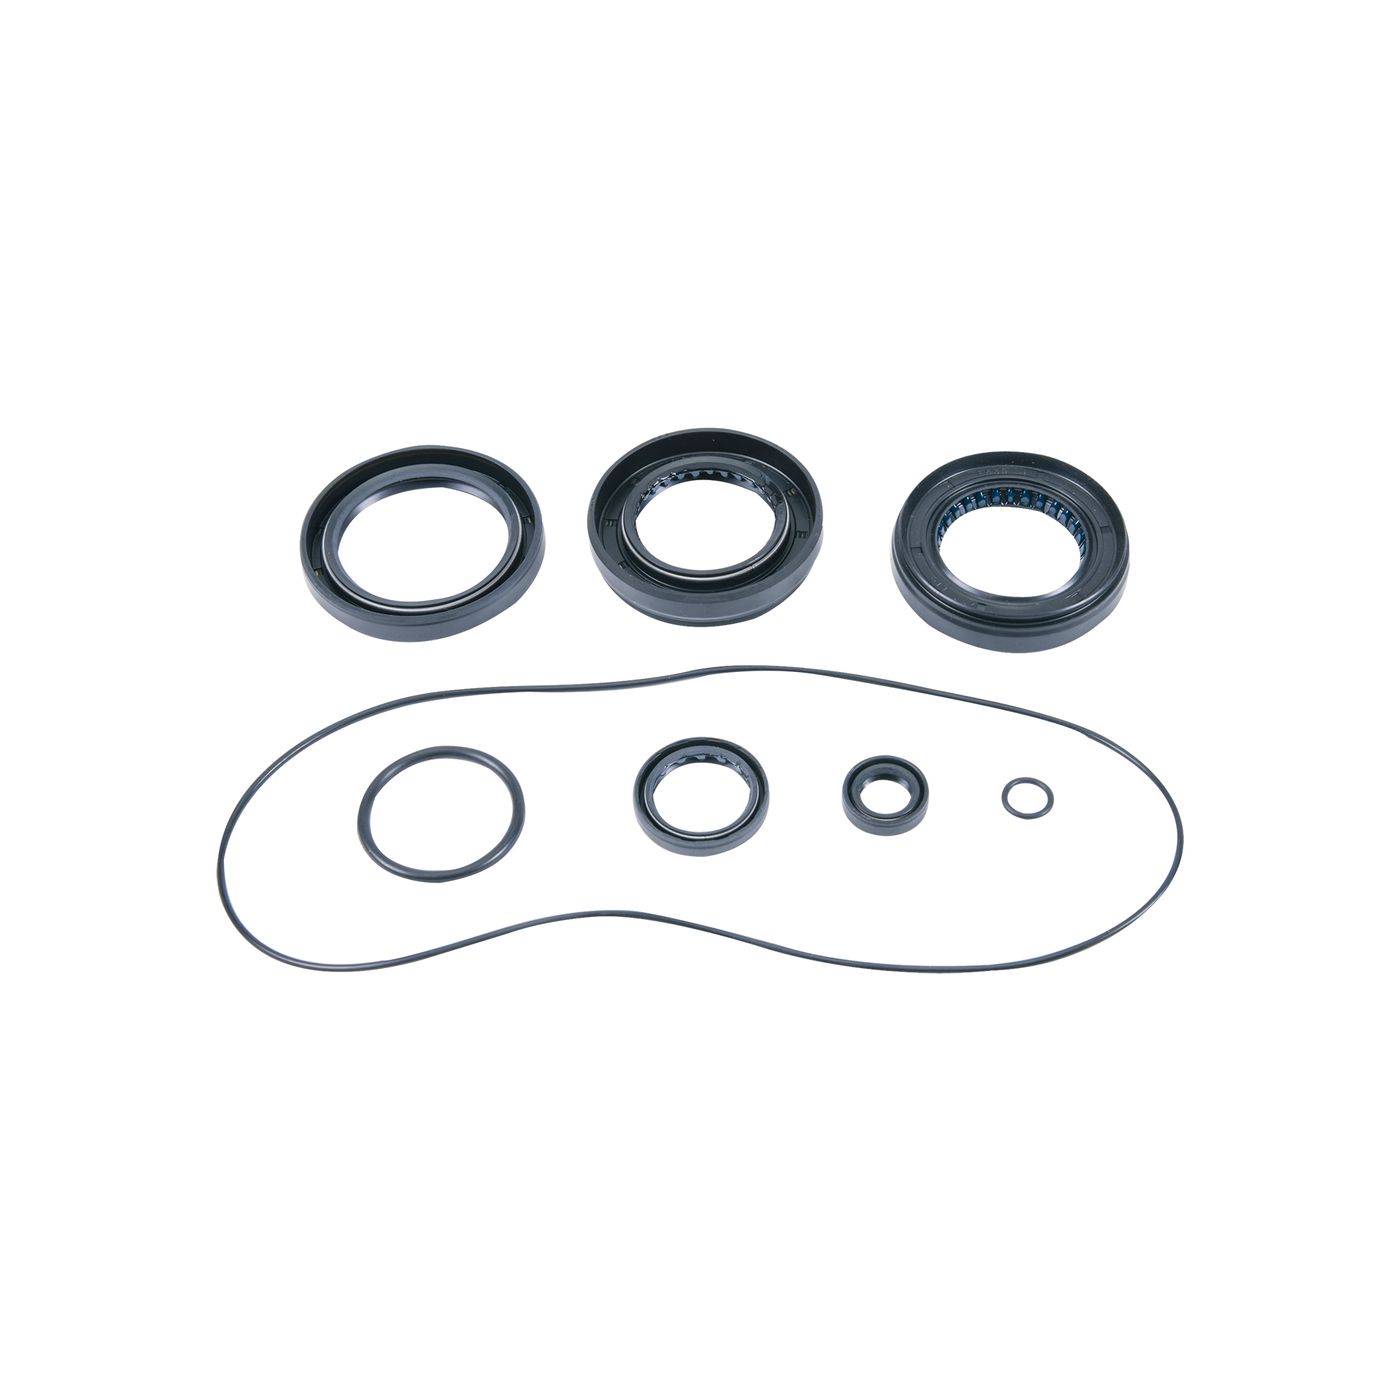 Wrp Diff Seal Kits - WRP252135-5 image